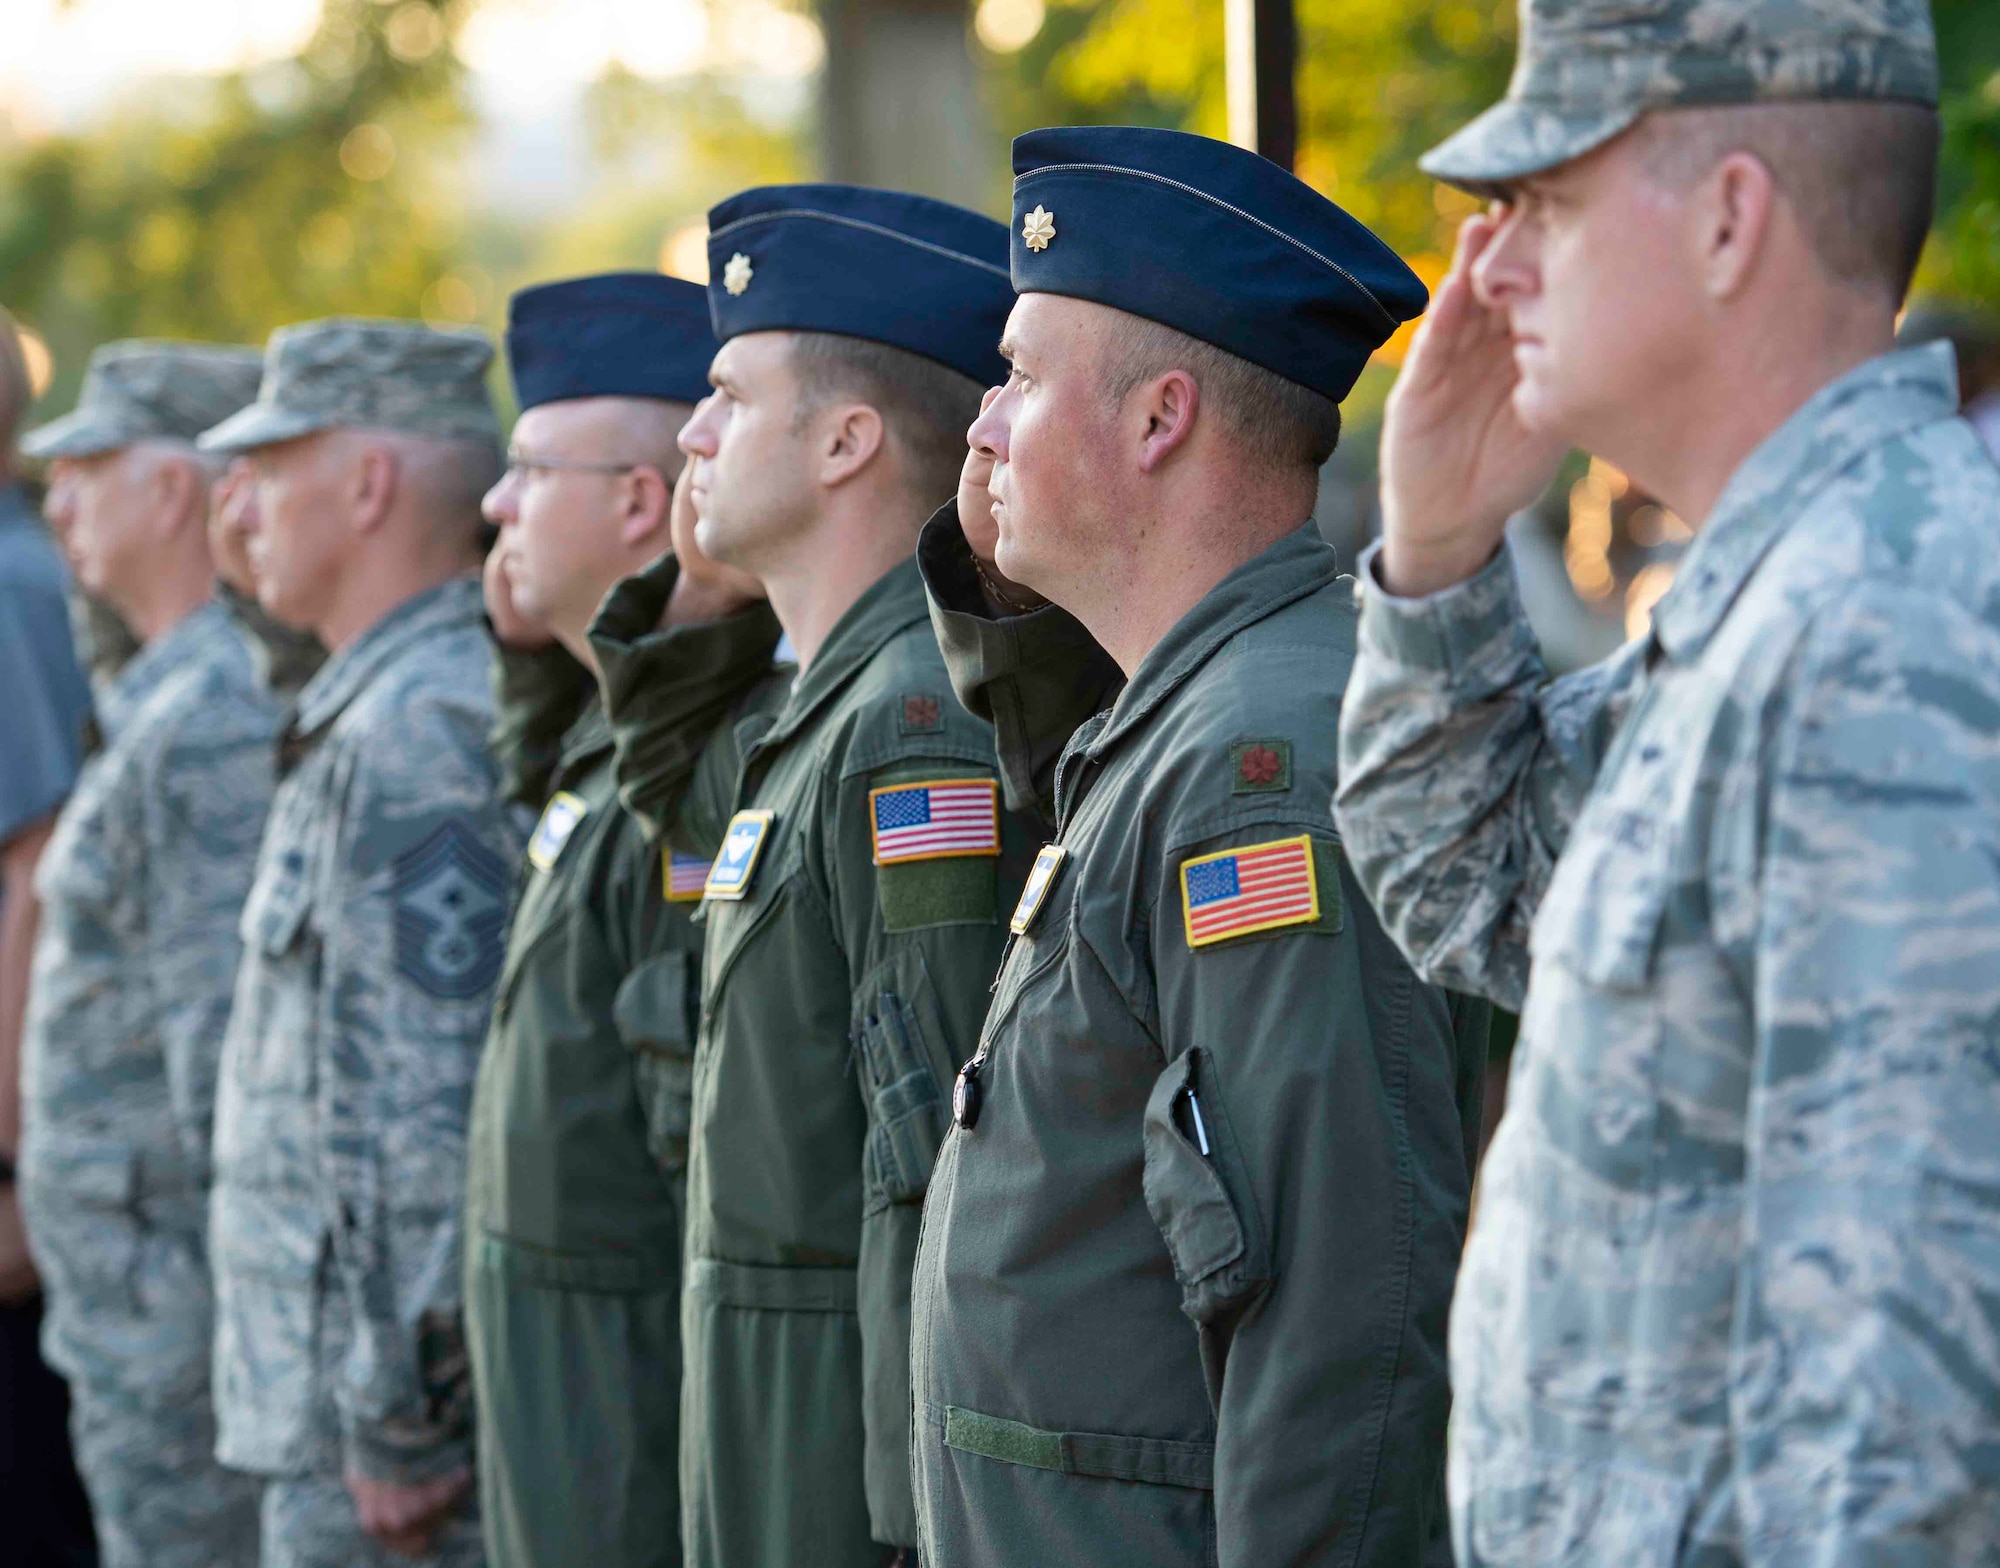 Scott Airmen salute the flag during a 9/11 memorial ceremony, Sept. 11, 2018, at Scott Air Force Base, Illinois. Following the raising of the flag, ceremony attendees remembered the victims of the 2001 terrorist attacks by participating in a moment of silence. (U.S. Air Force photo by Airman 1st Class Tara Stetler)